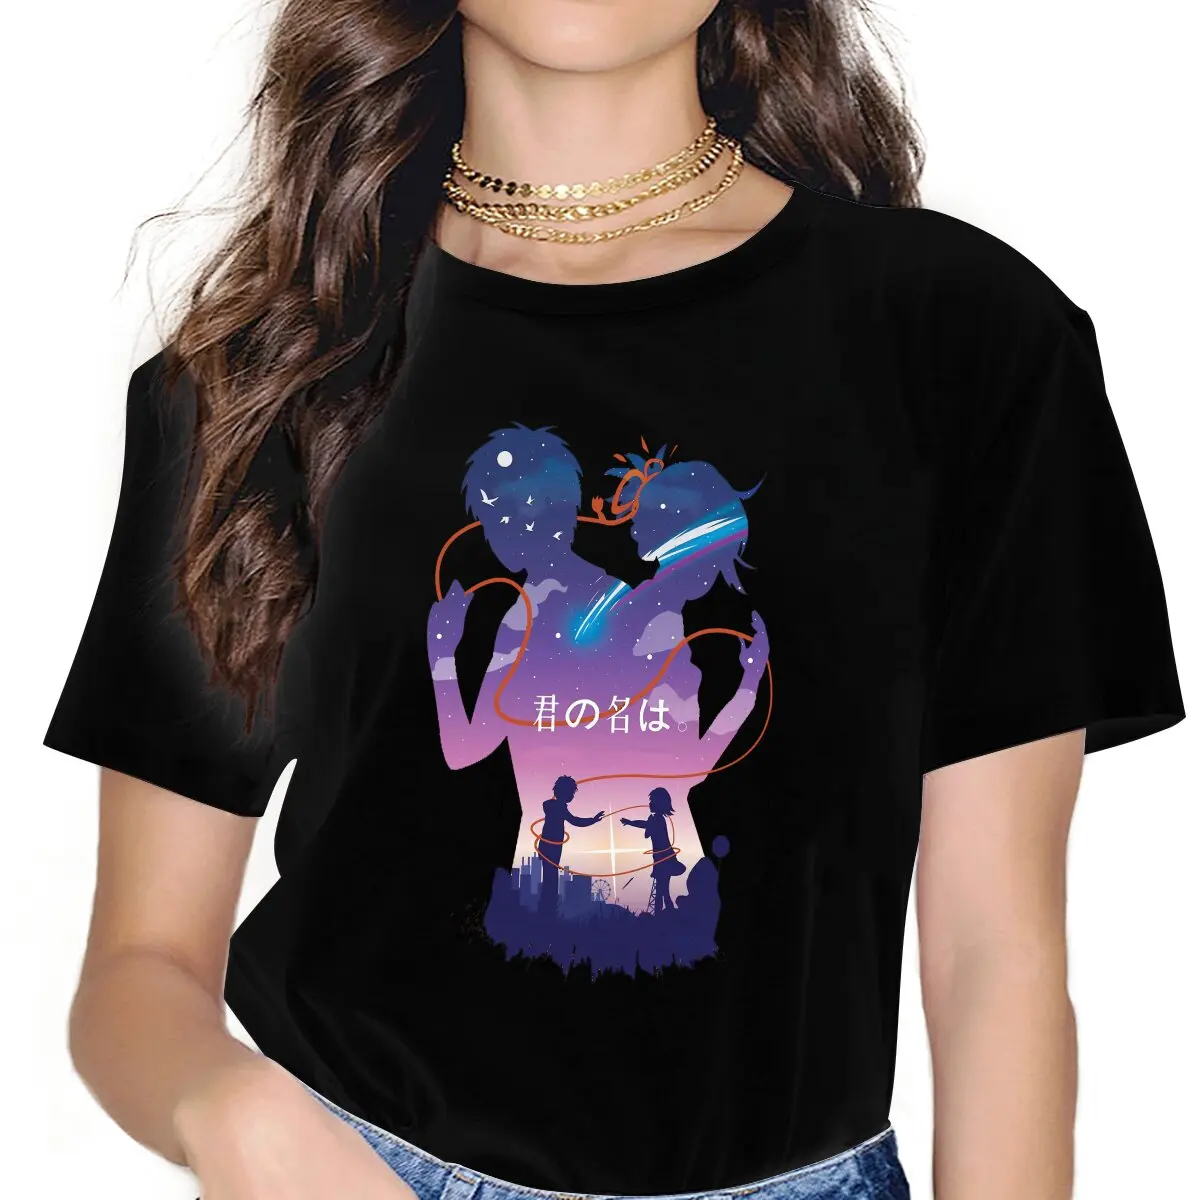 Negative Space Women Clothing Your Name Anime Graphic Female Tshirts  Vintage Gothic Loose Tops Tee Kawaii Girls Streetwear